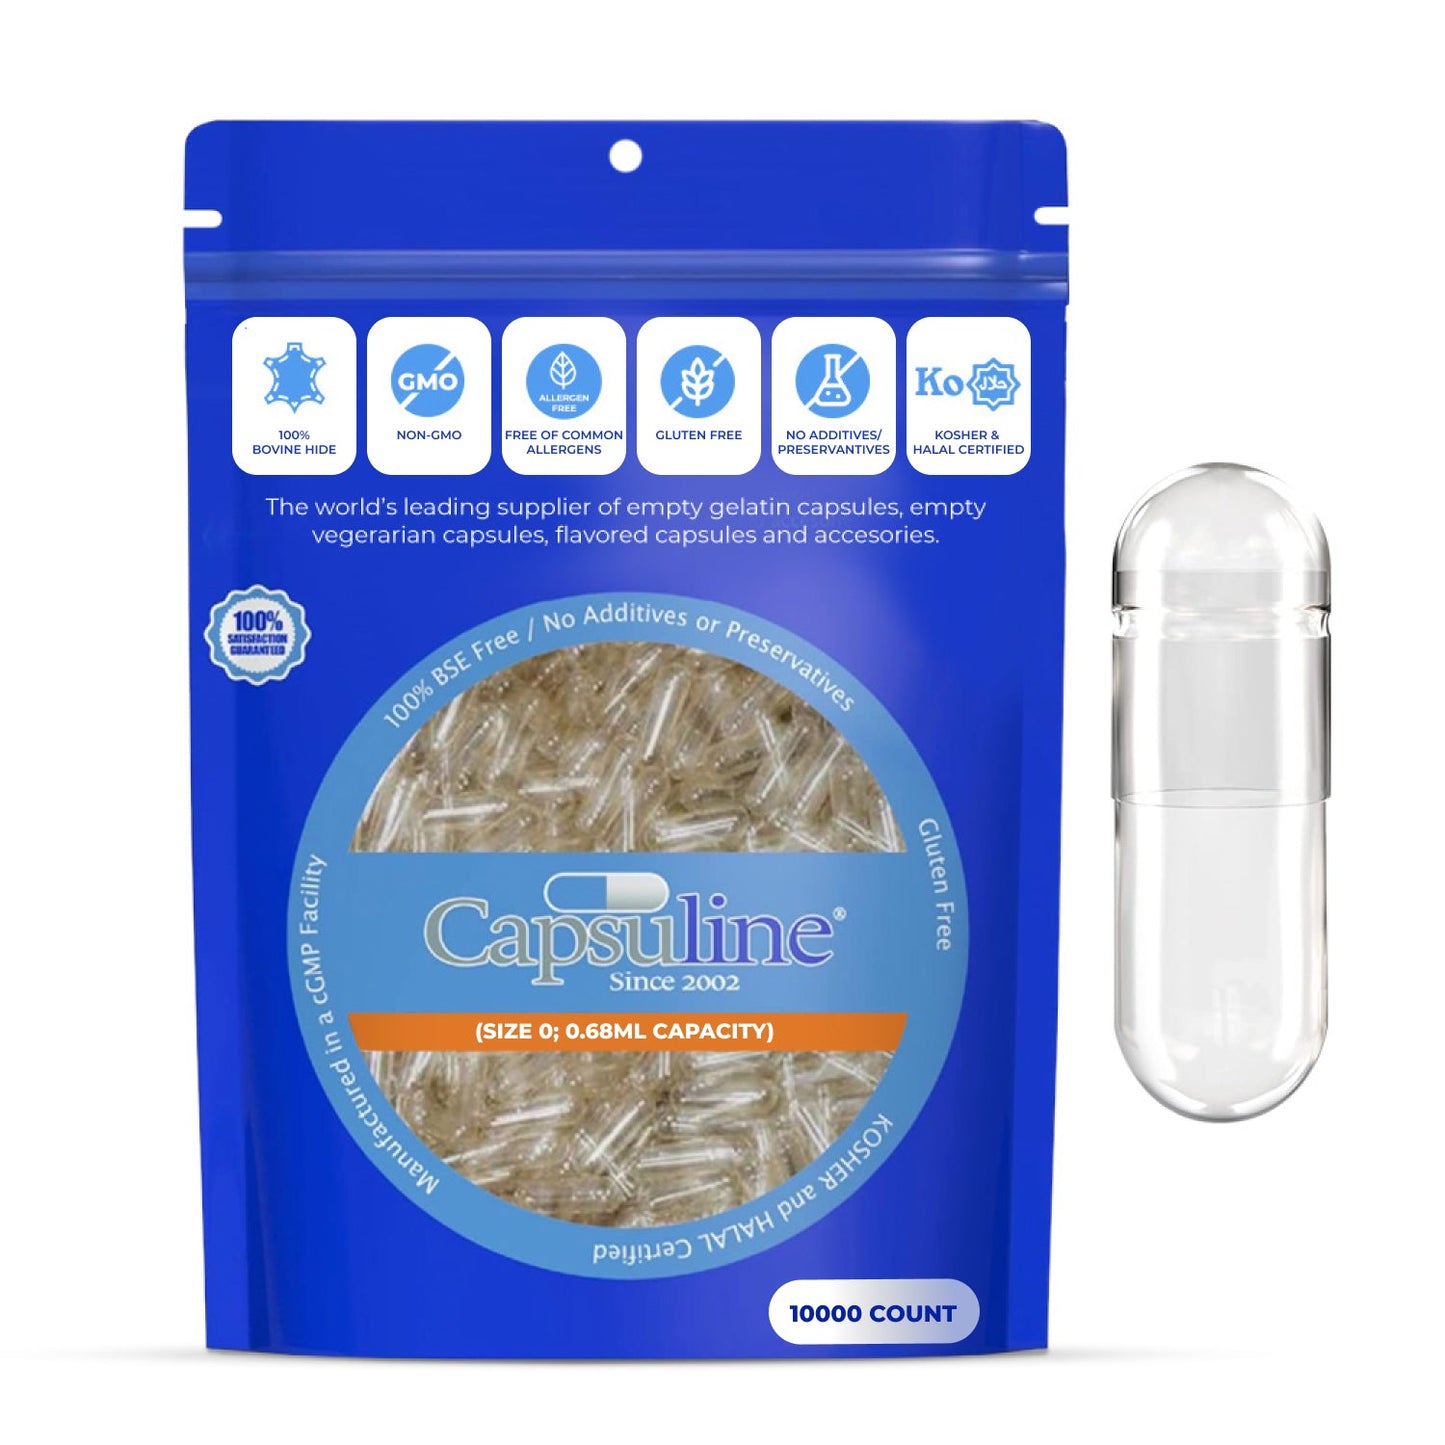 Clear Size 0 Empty Gelatin Capsules by Capsuline - 10000 Count - 10000 count - 10000